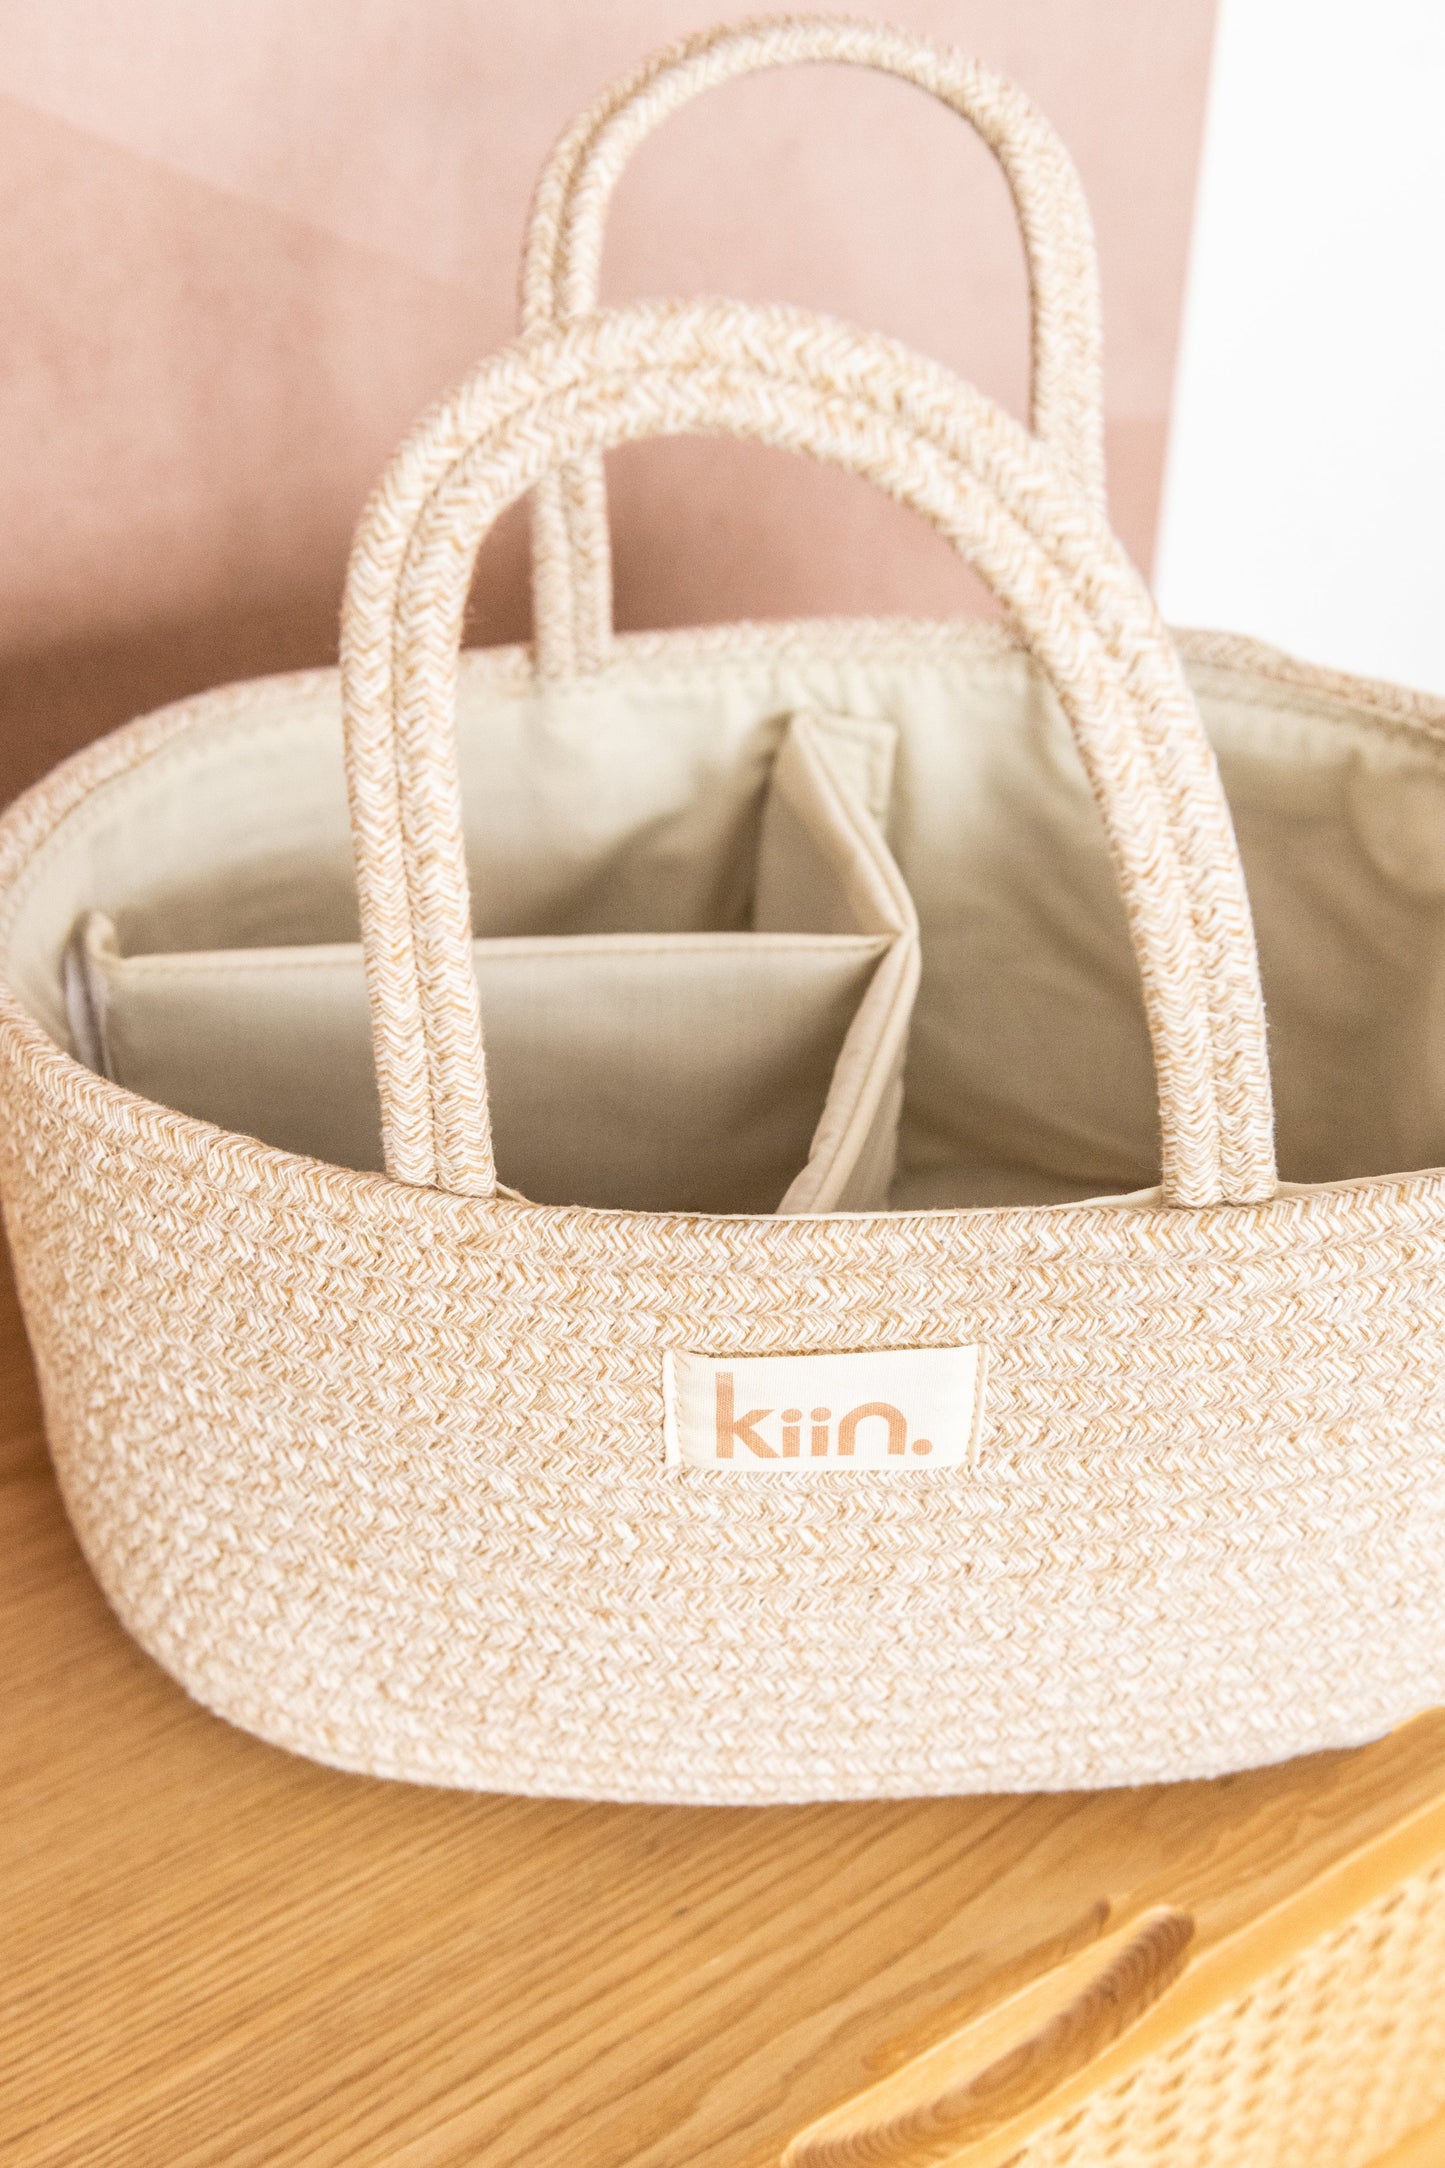 Nappy Caddy Organiser - Cotton Rope